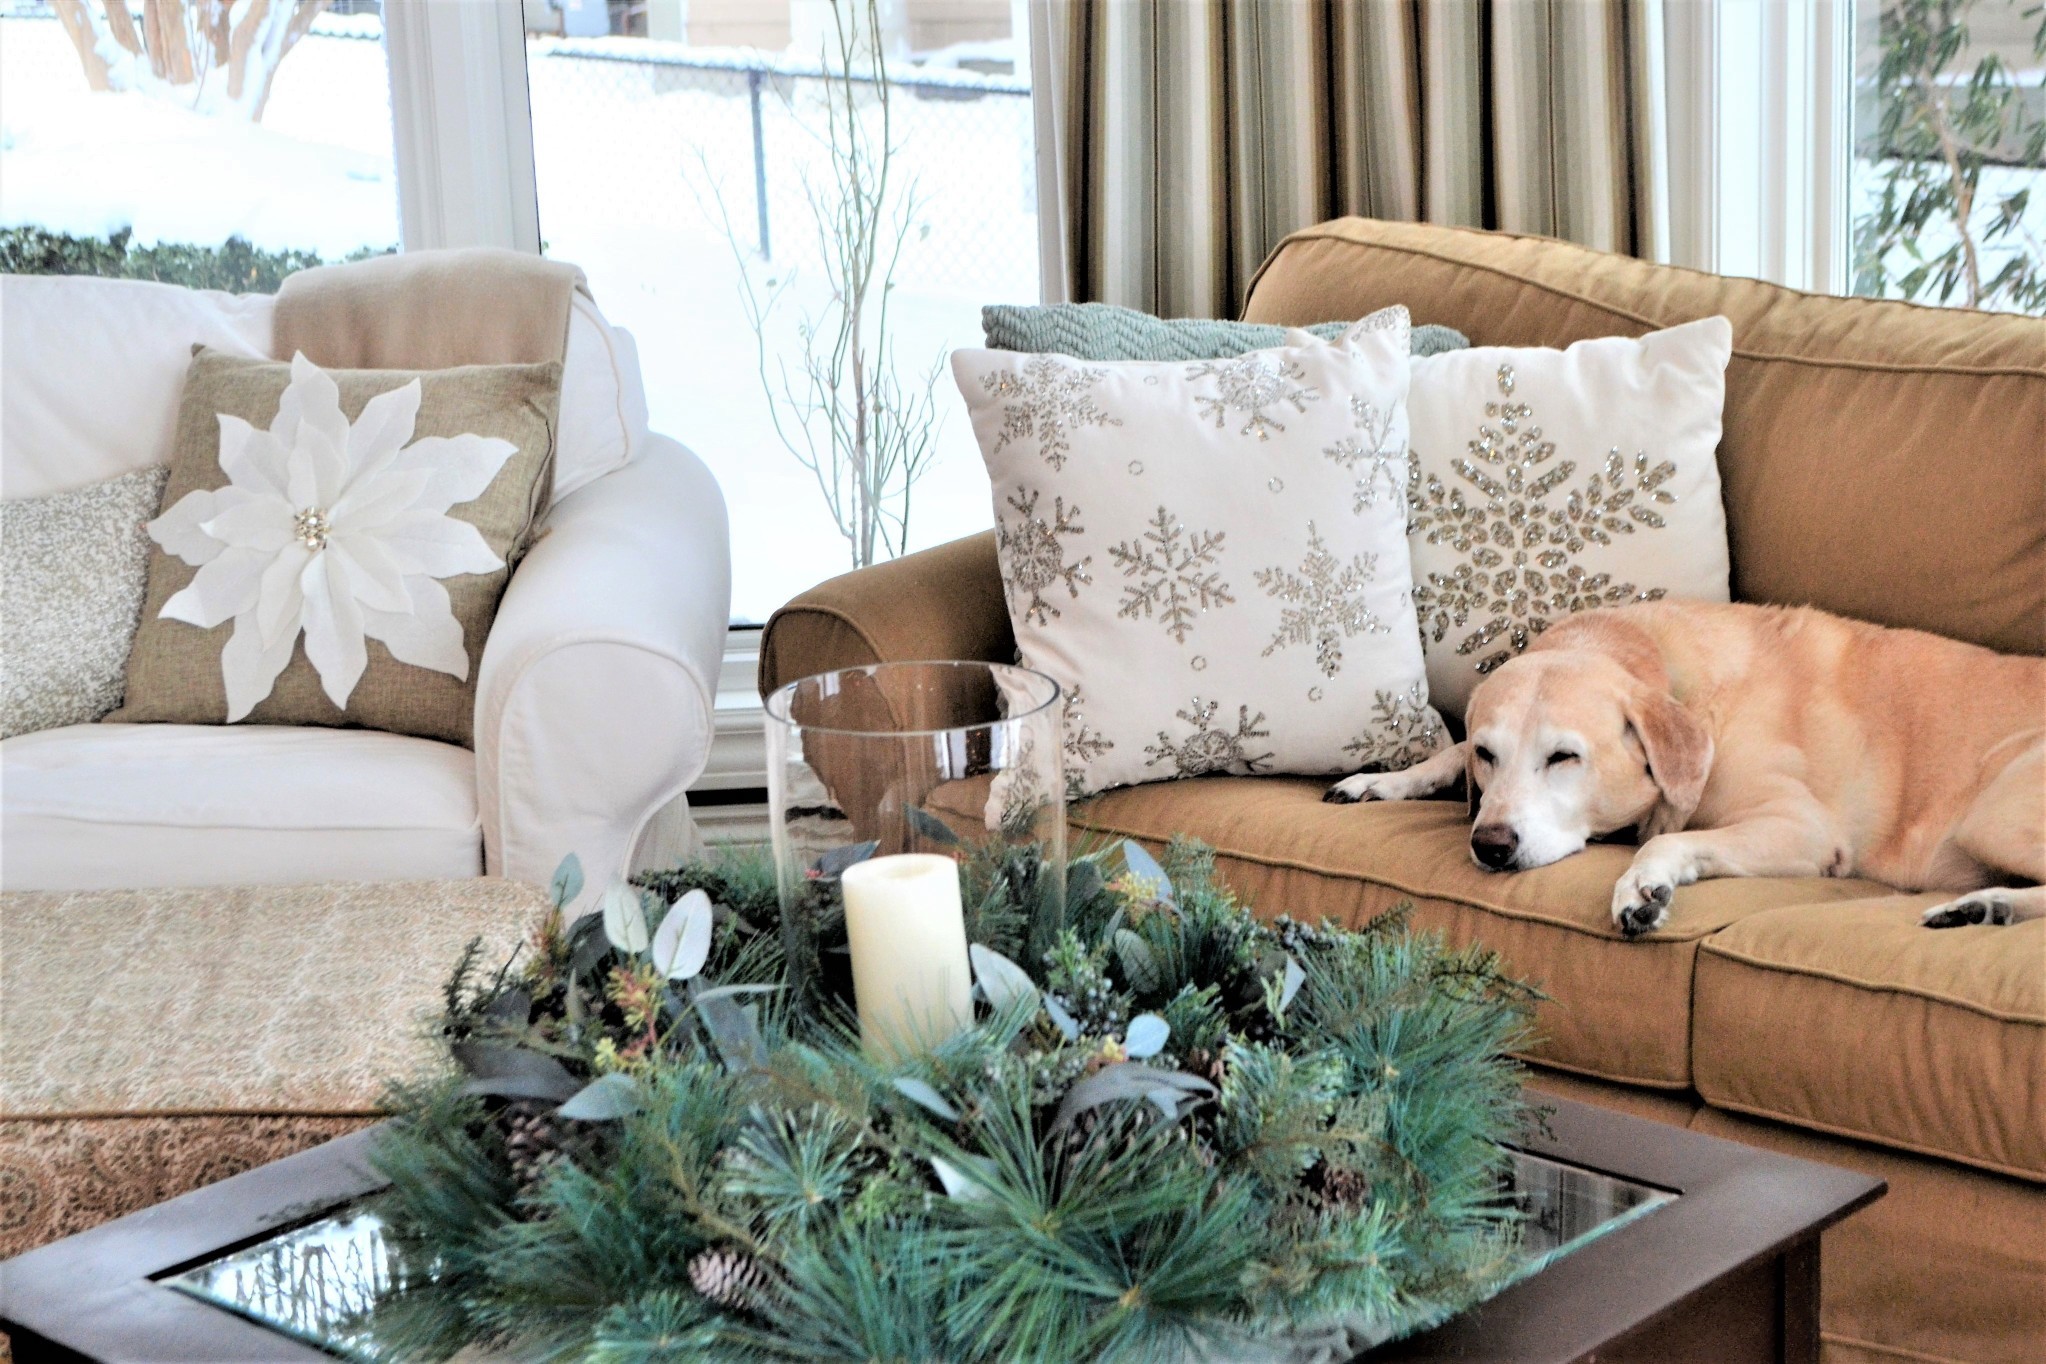 Creating Luxury Home Spaces for Pets